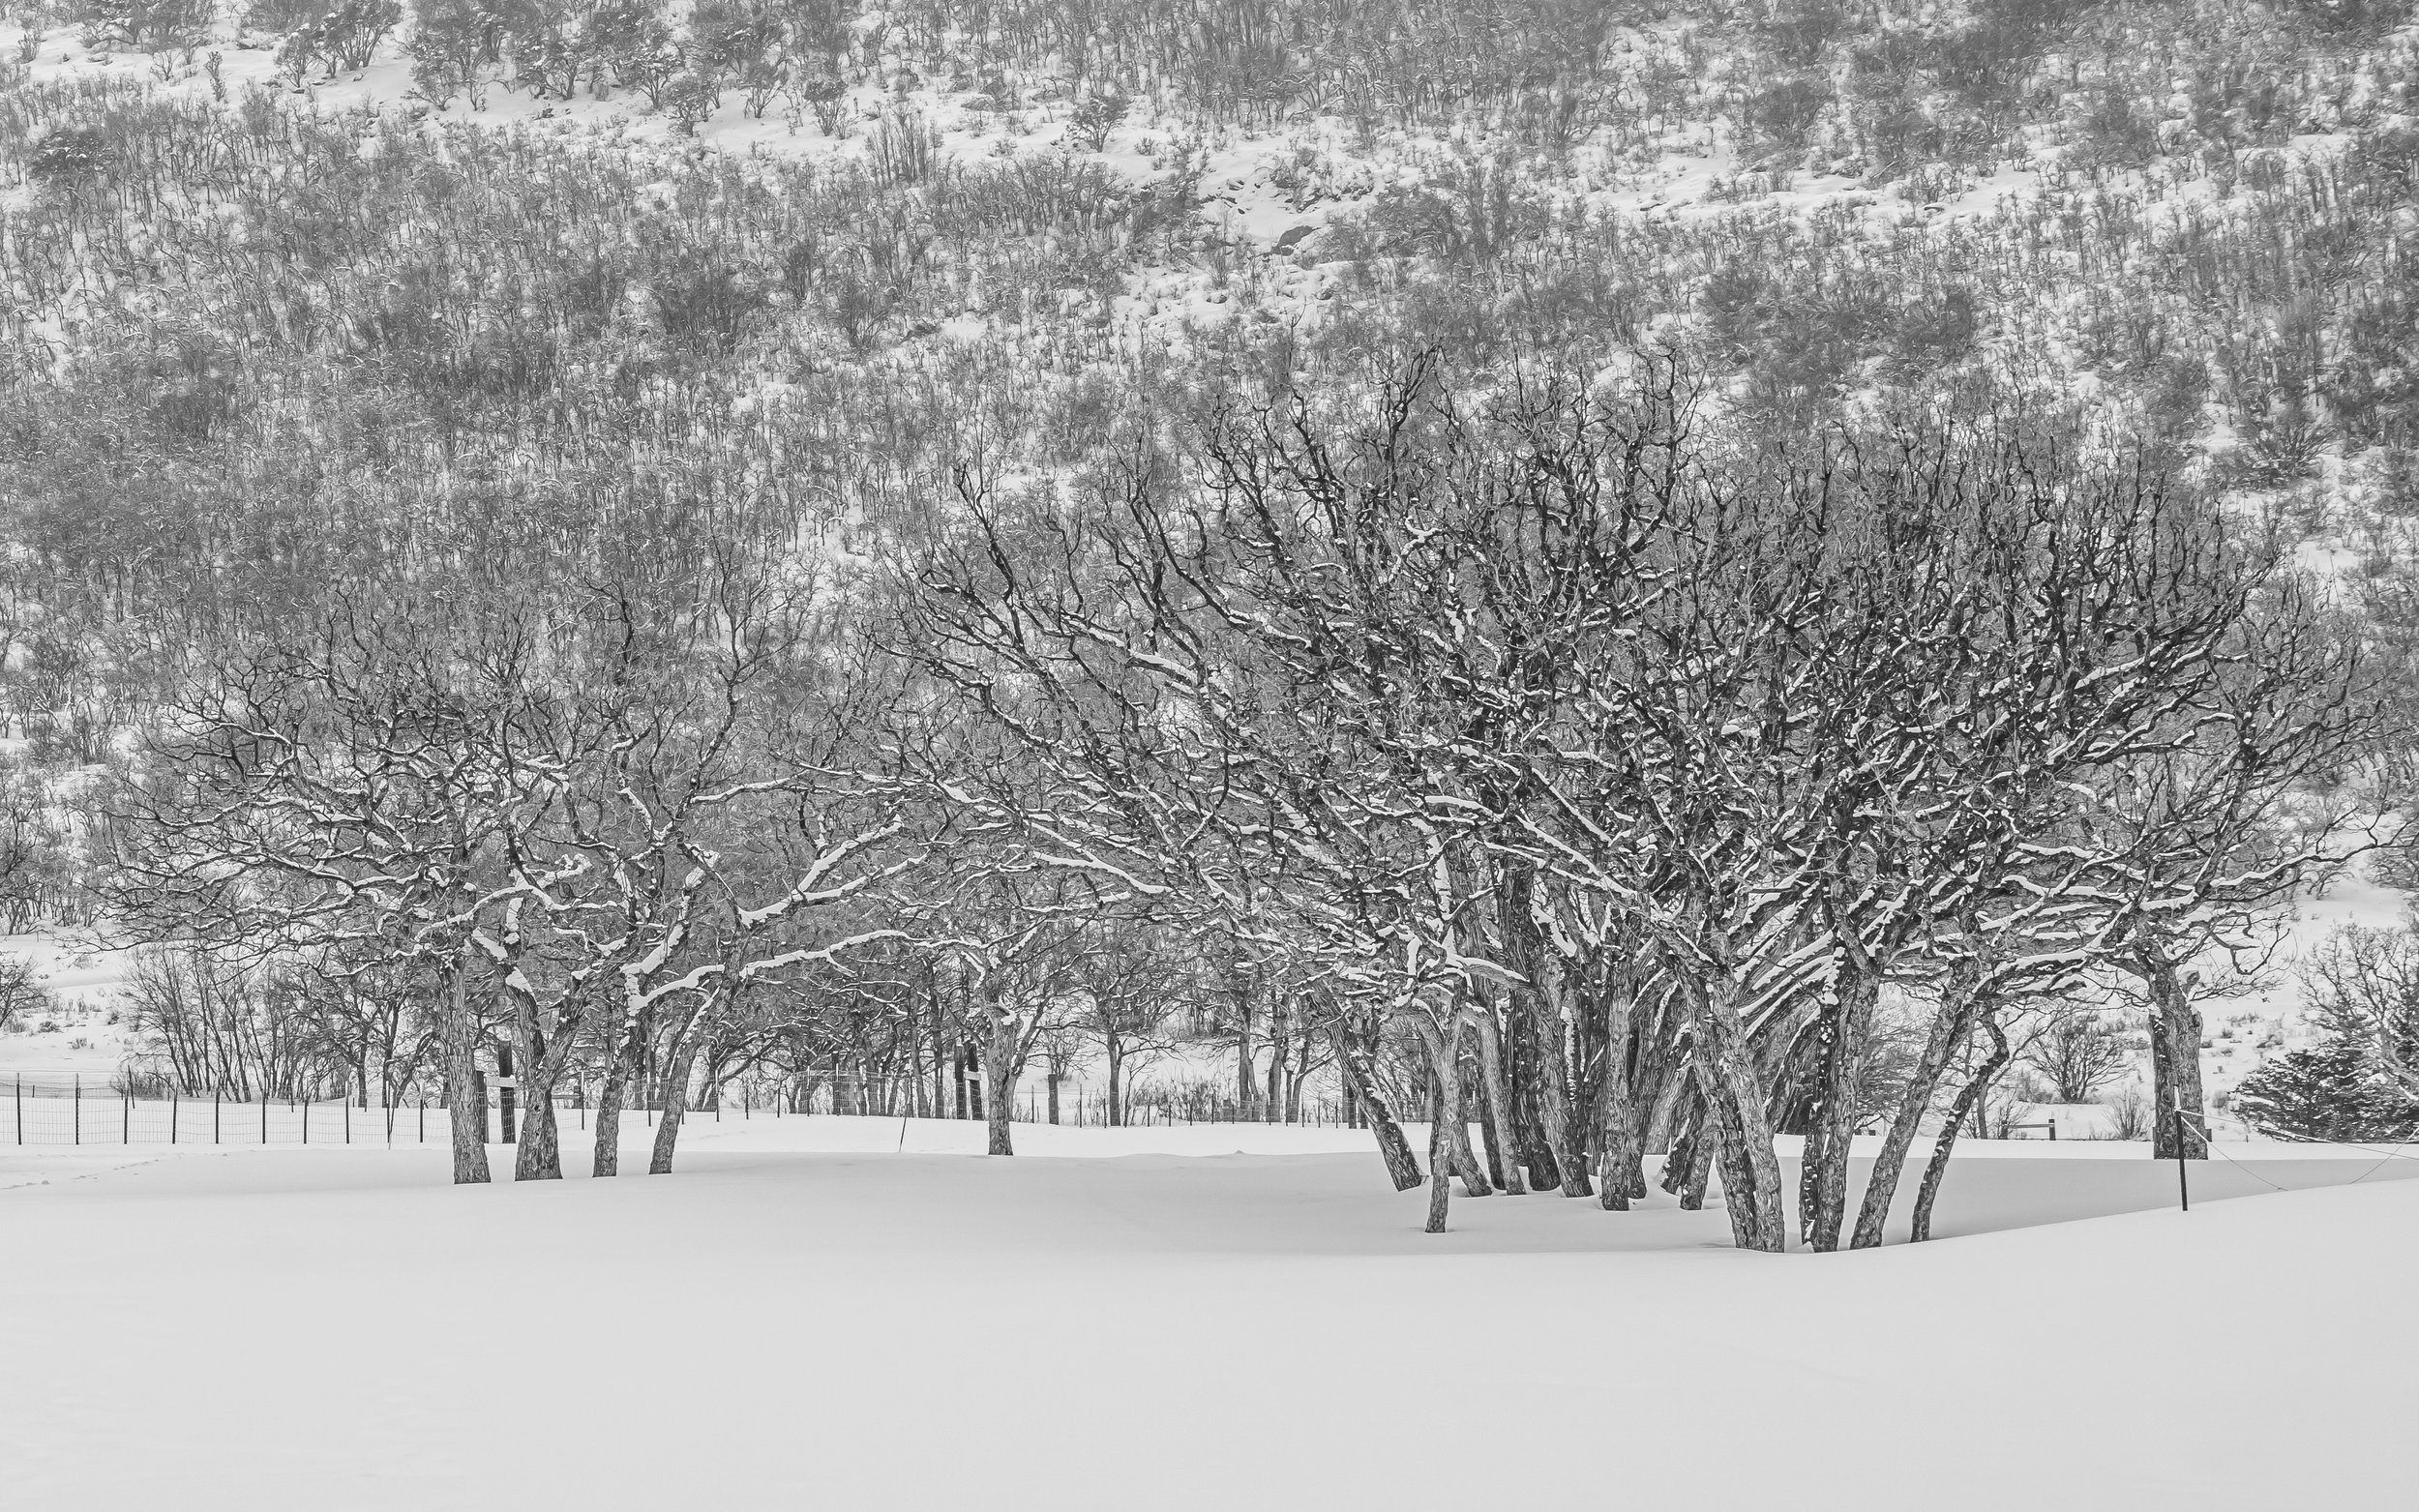 Grove of Trees in Snow B&W